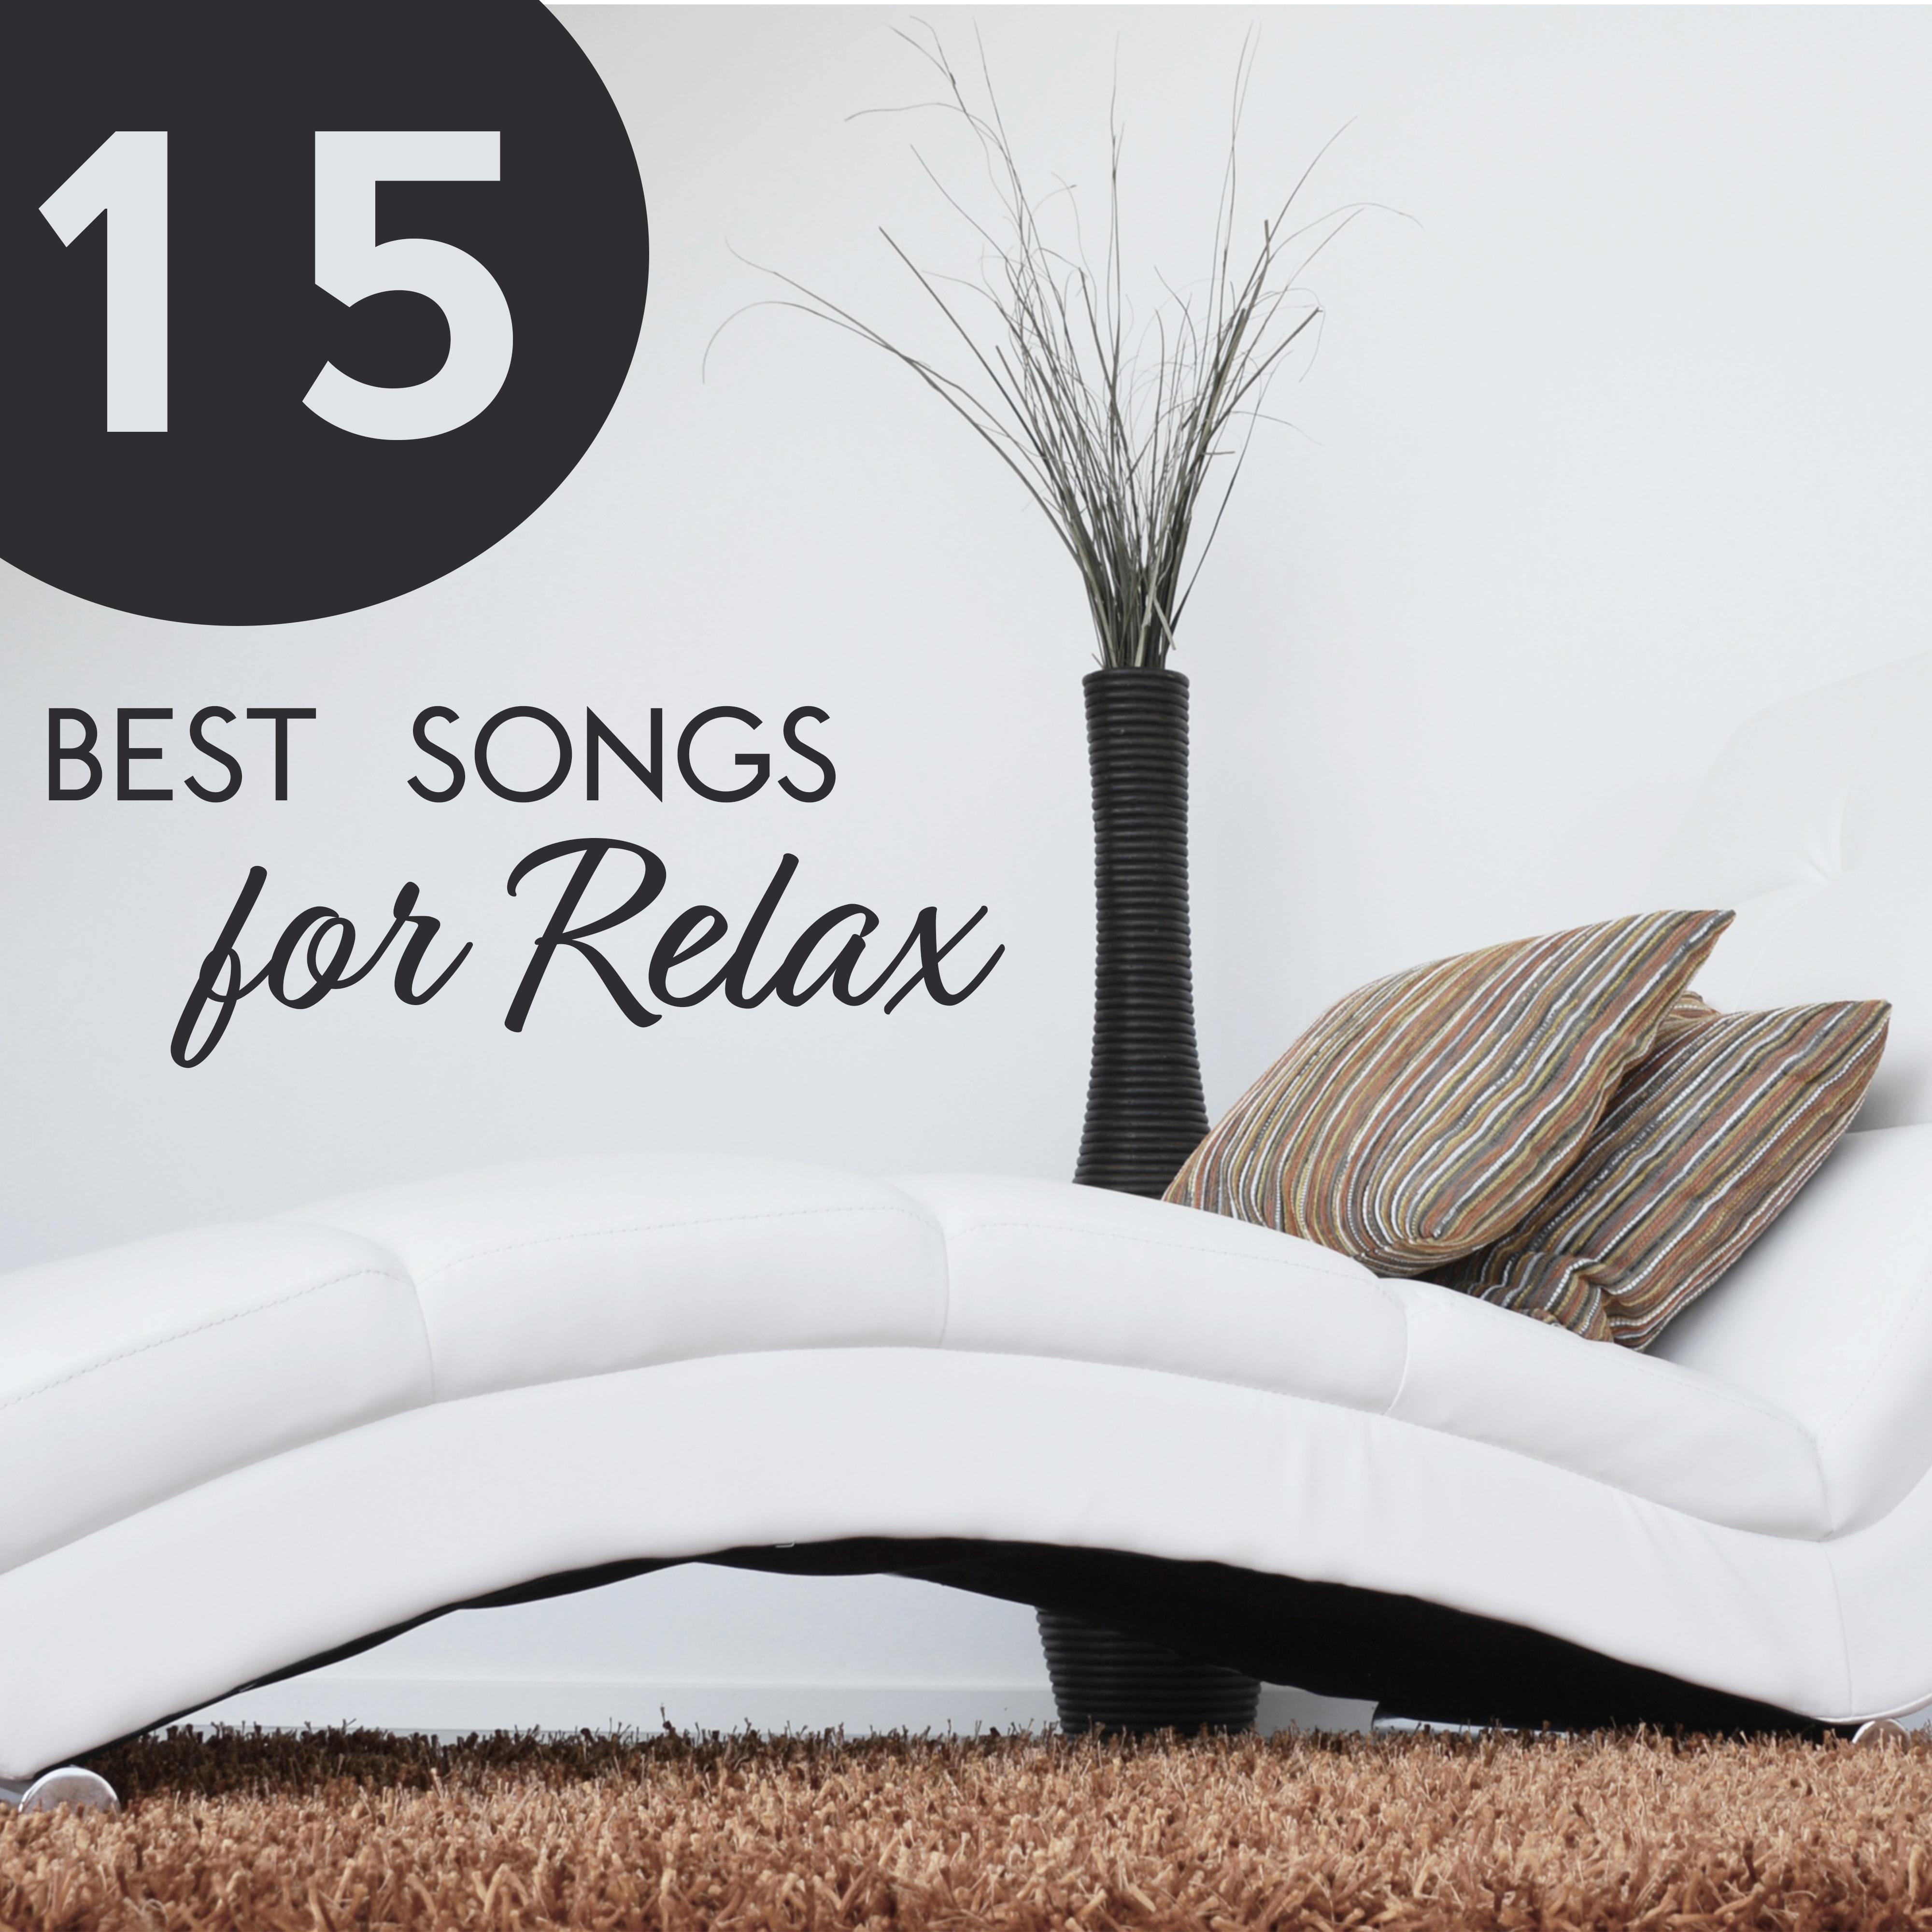 15 Best Songs for Relax